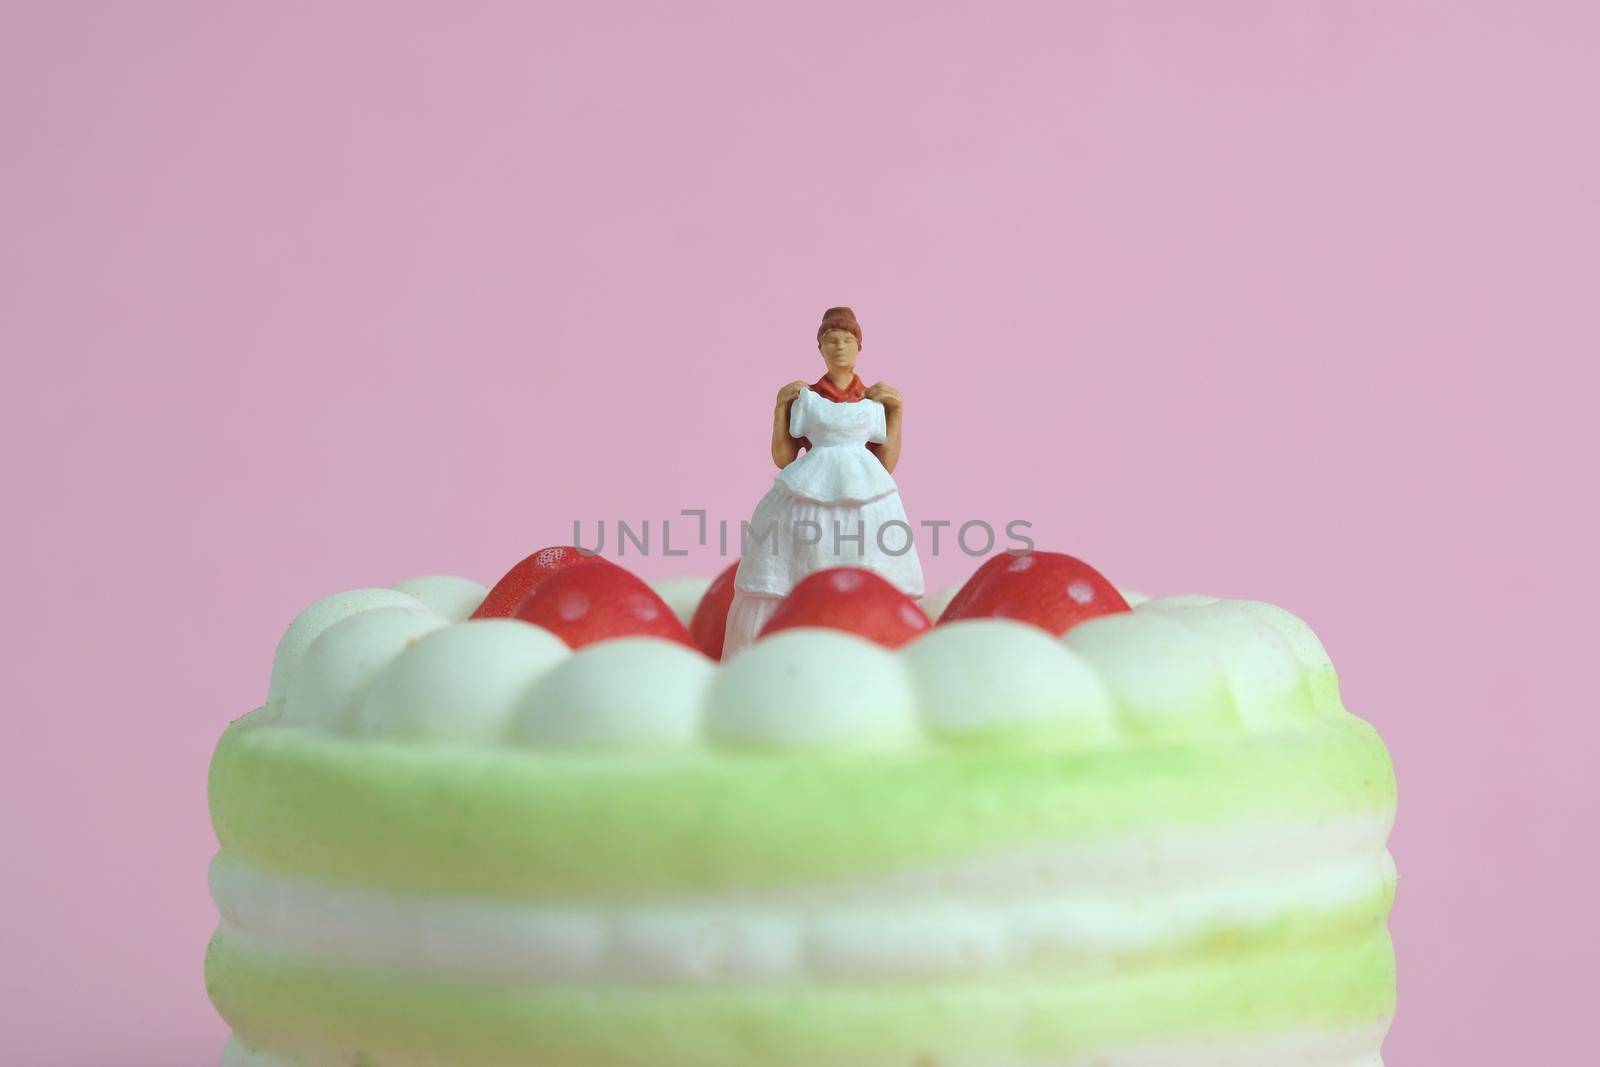 Woman dieting from cake before wedding day concept. Miniature people toys photography, girl holding wedding dress. Image photo